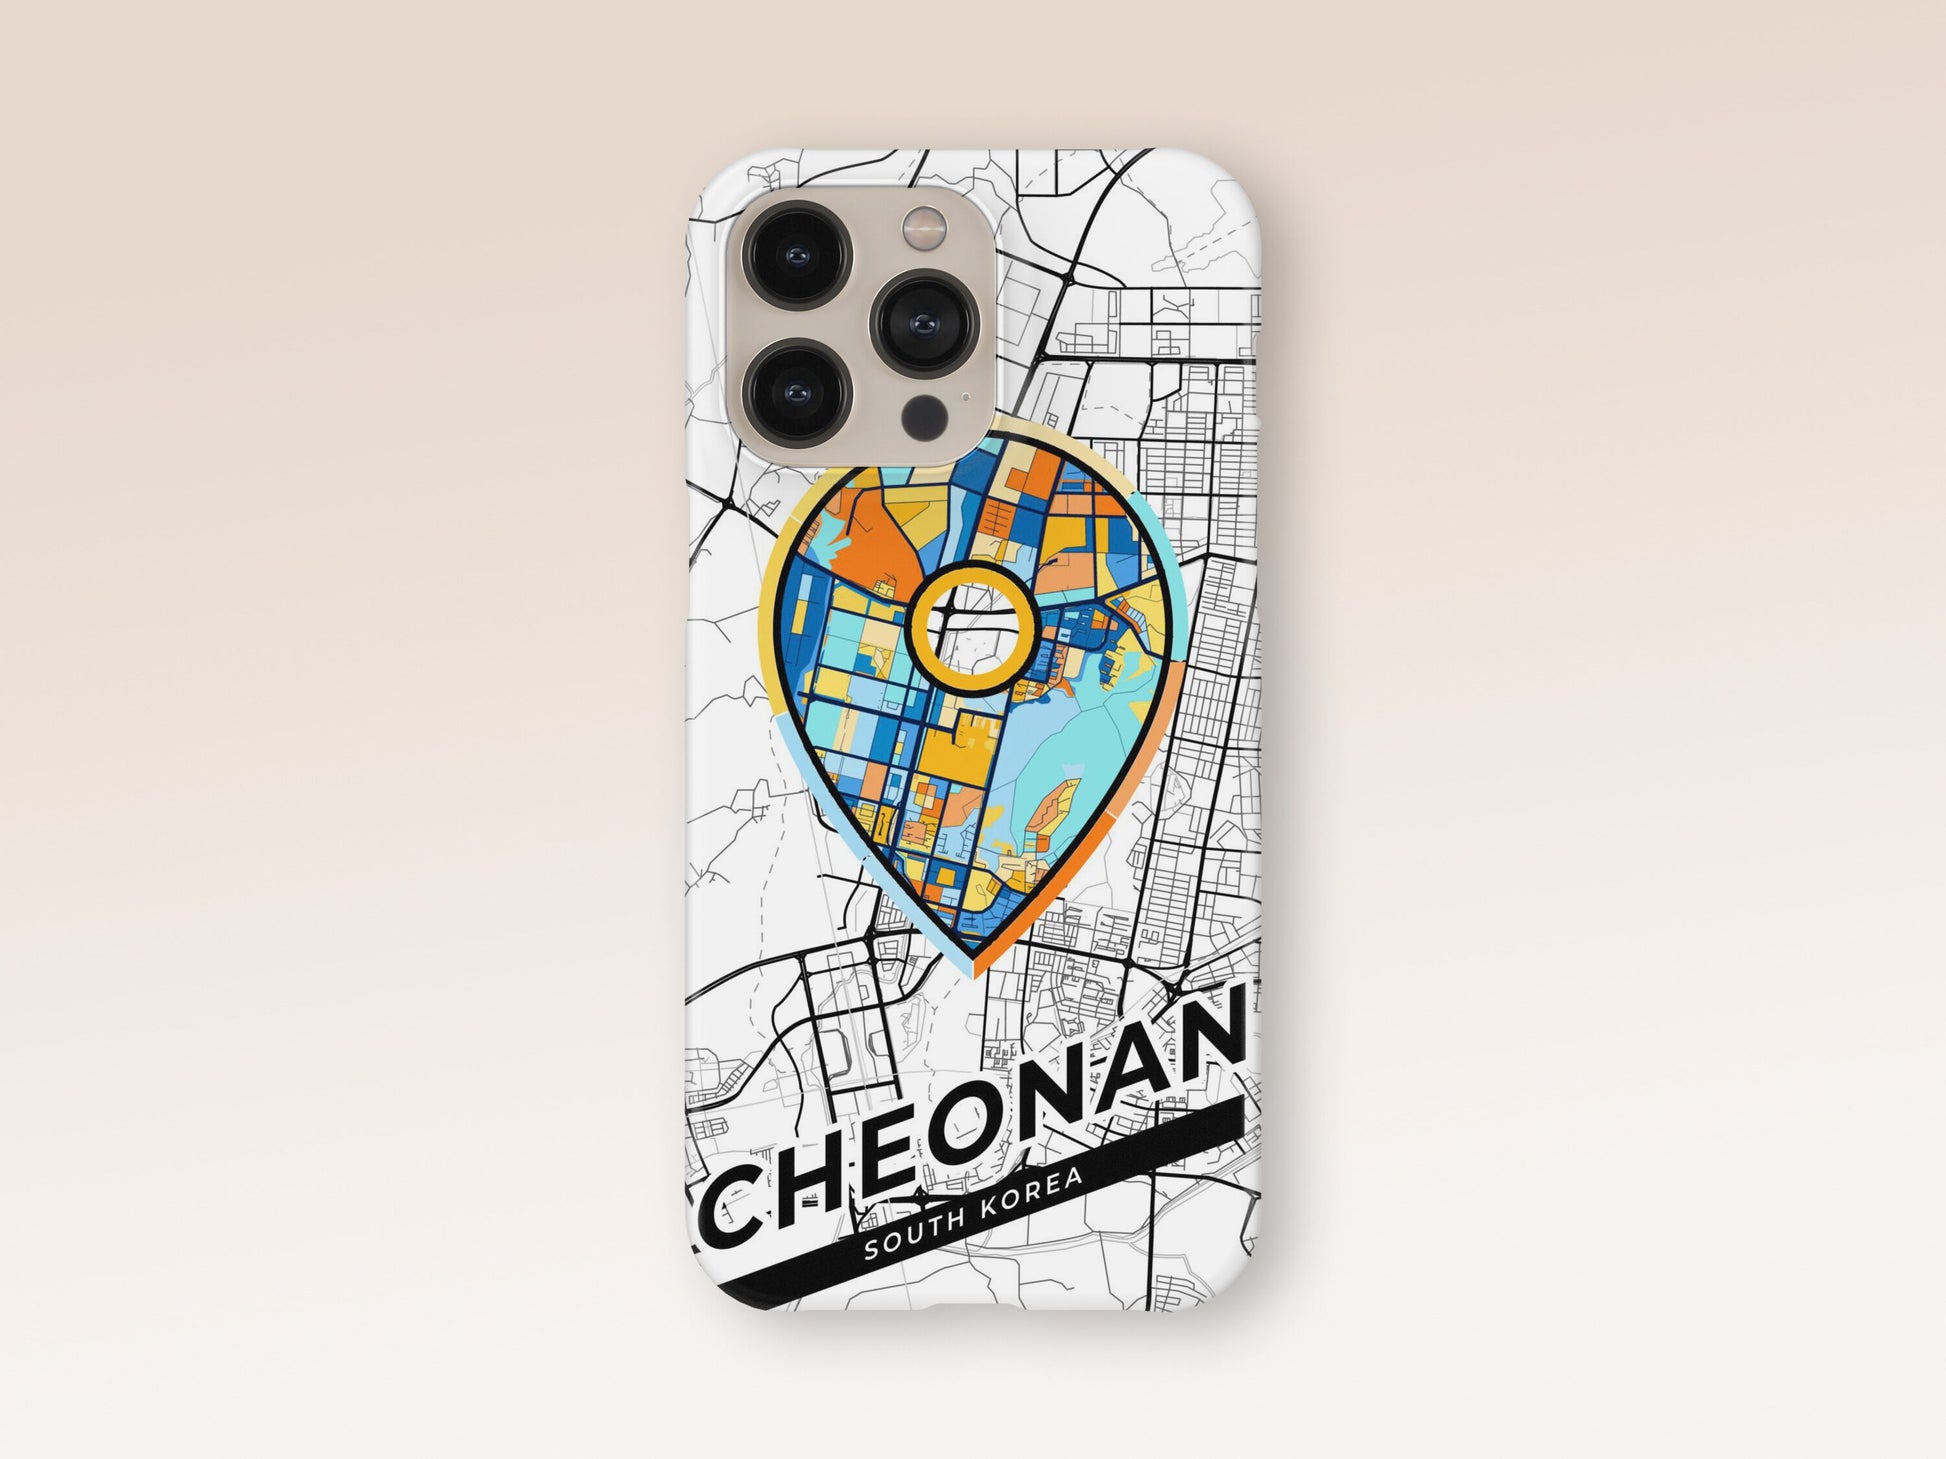 Cheonan South Korea slim phone case with colorful icon. Birthday, wedding or housewarming gift. Couple match cases. 1